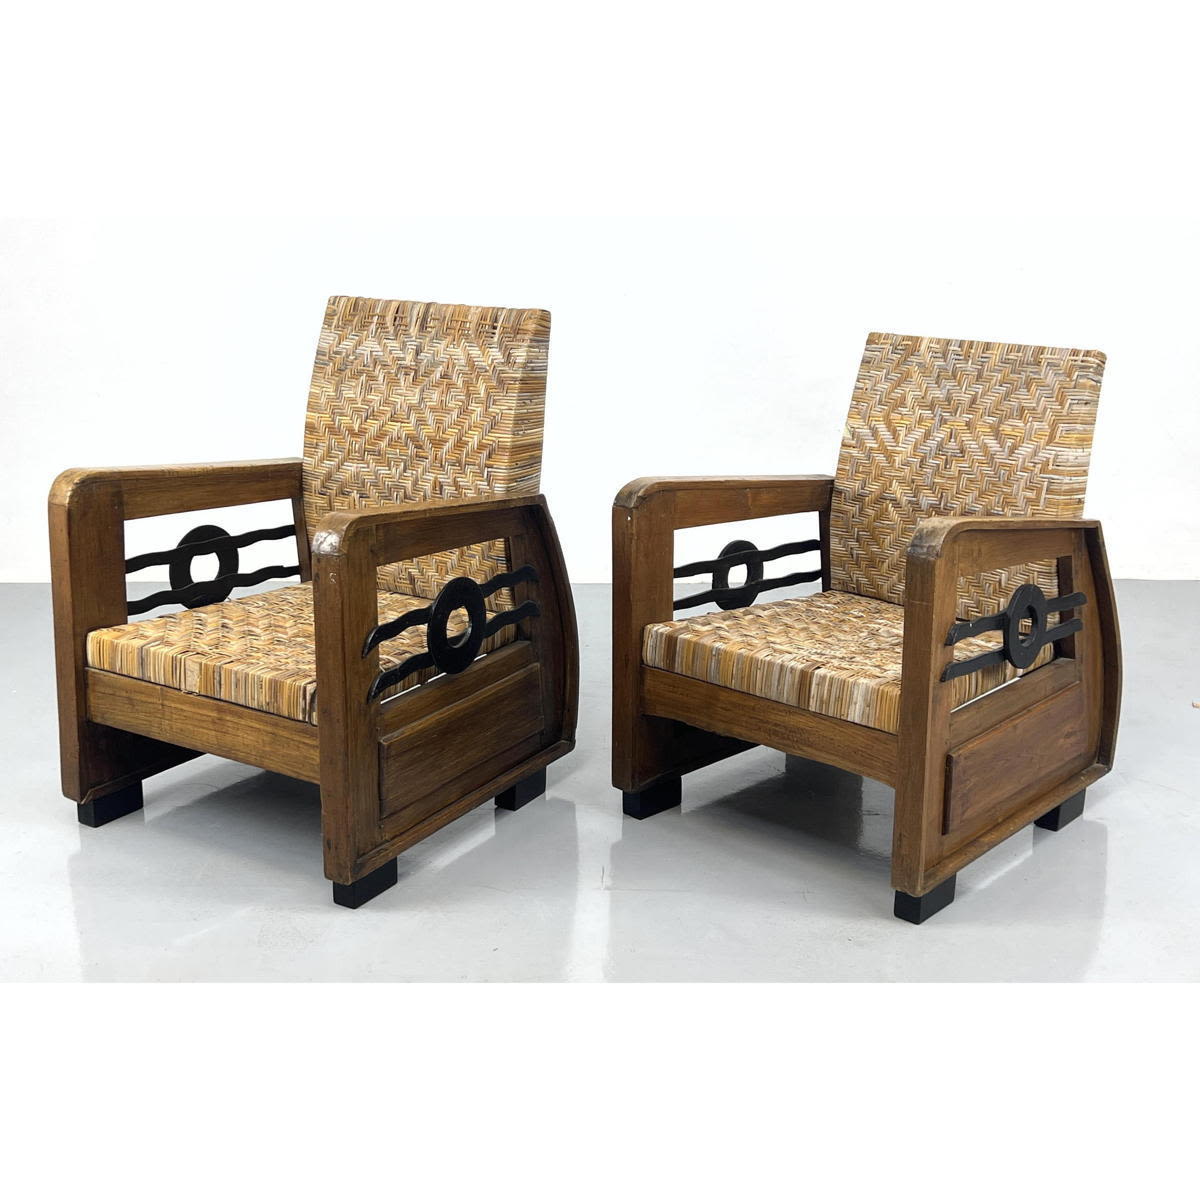 Pr French Deco Style Lounge Chairs.